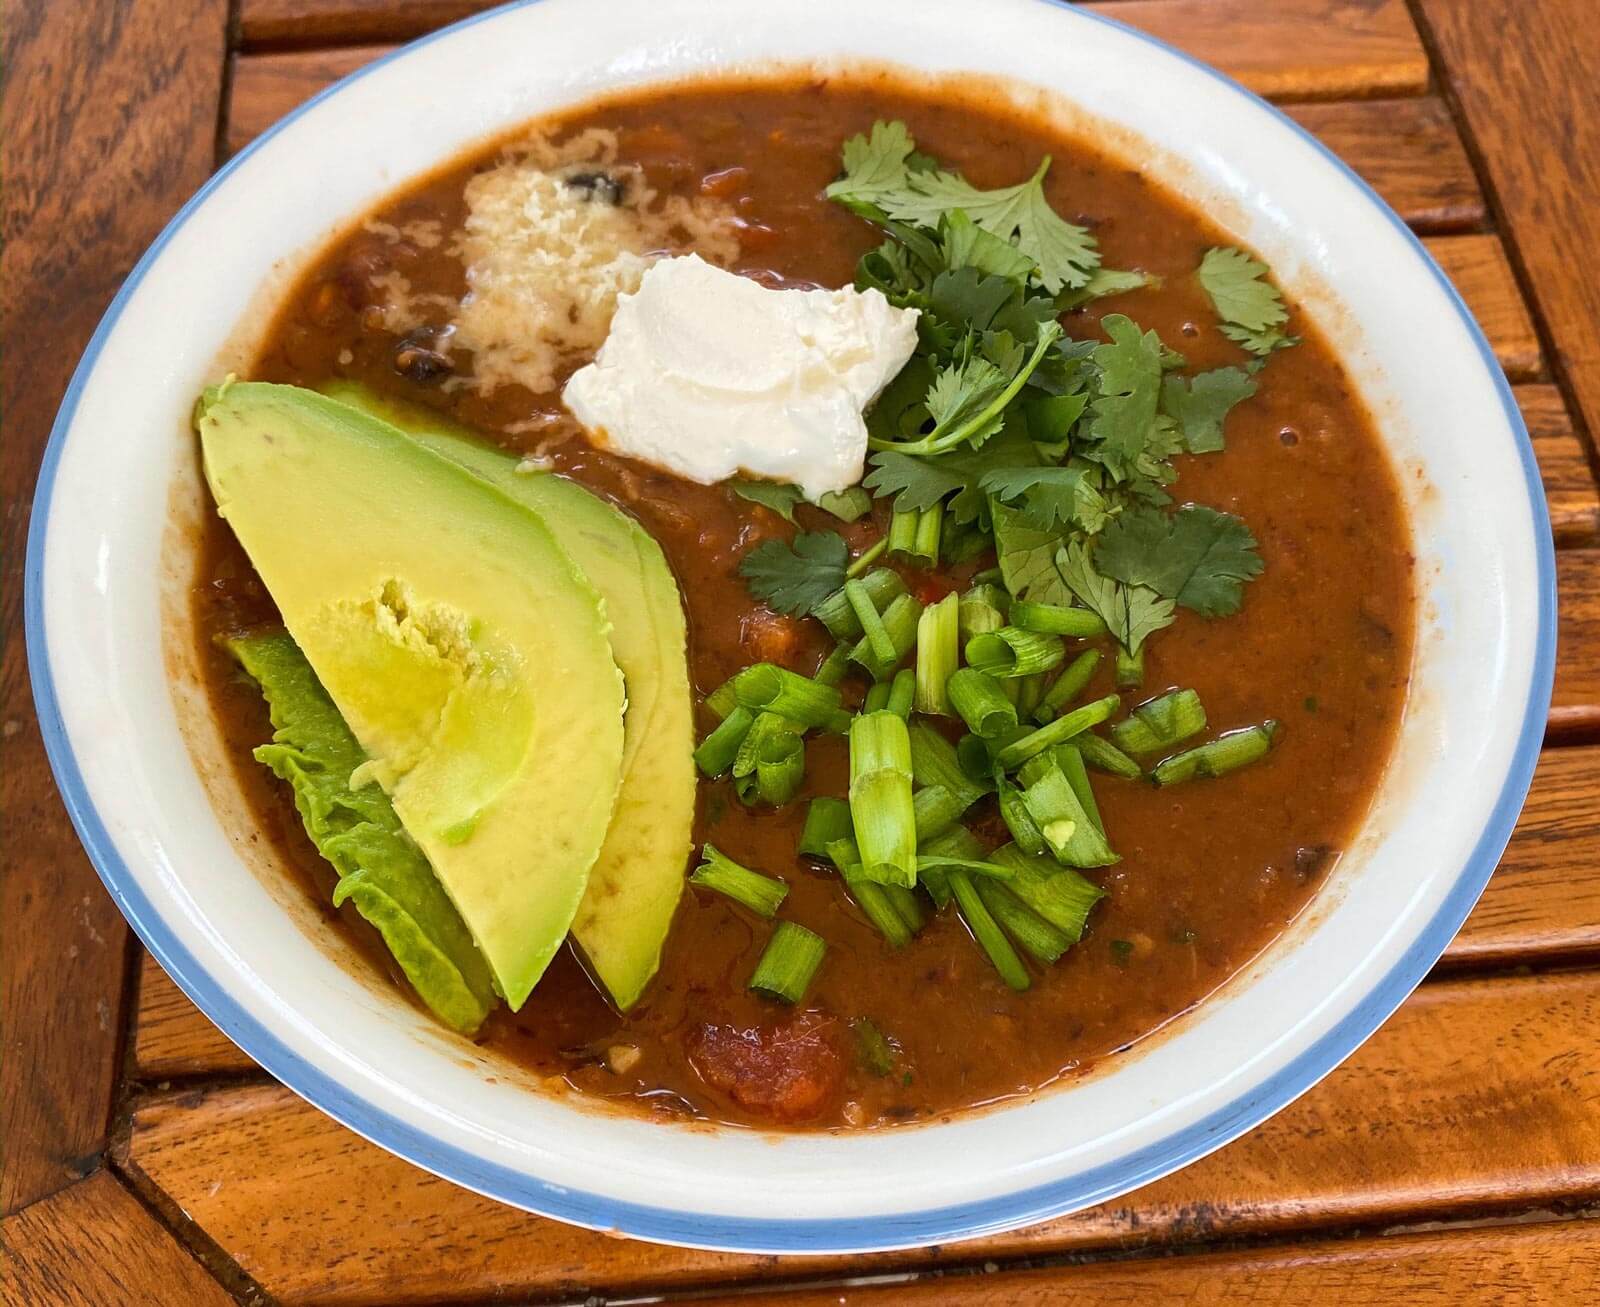 vegetable chili bowl with avocado, herbs, cheese, and sour cream as toppings